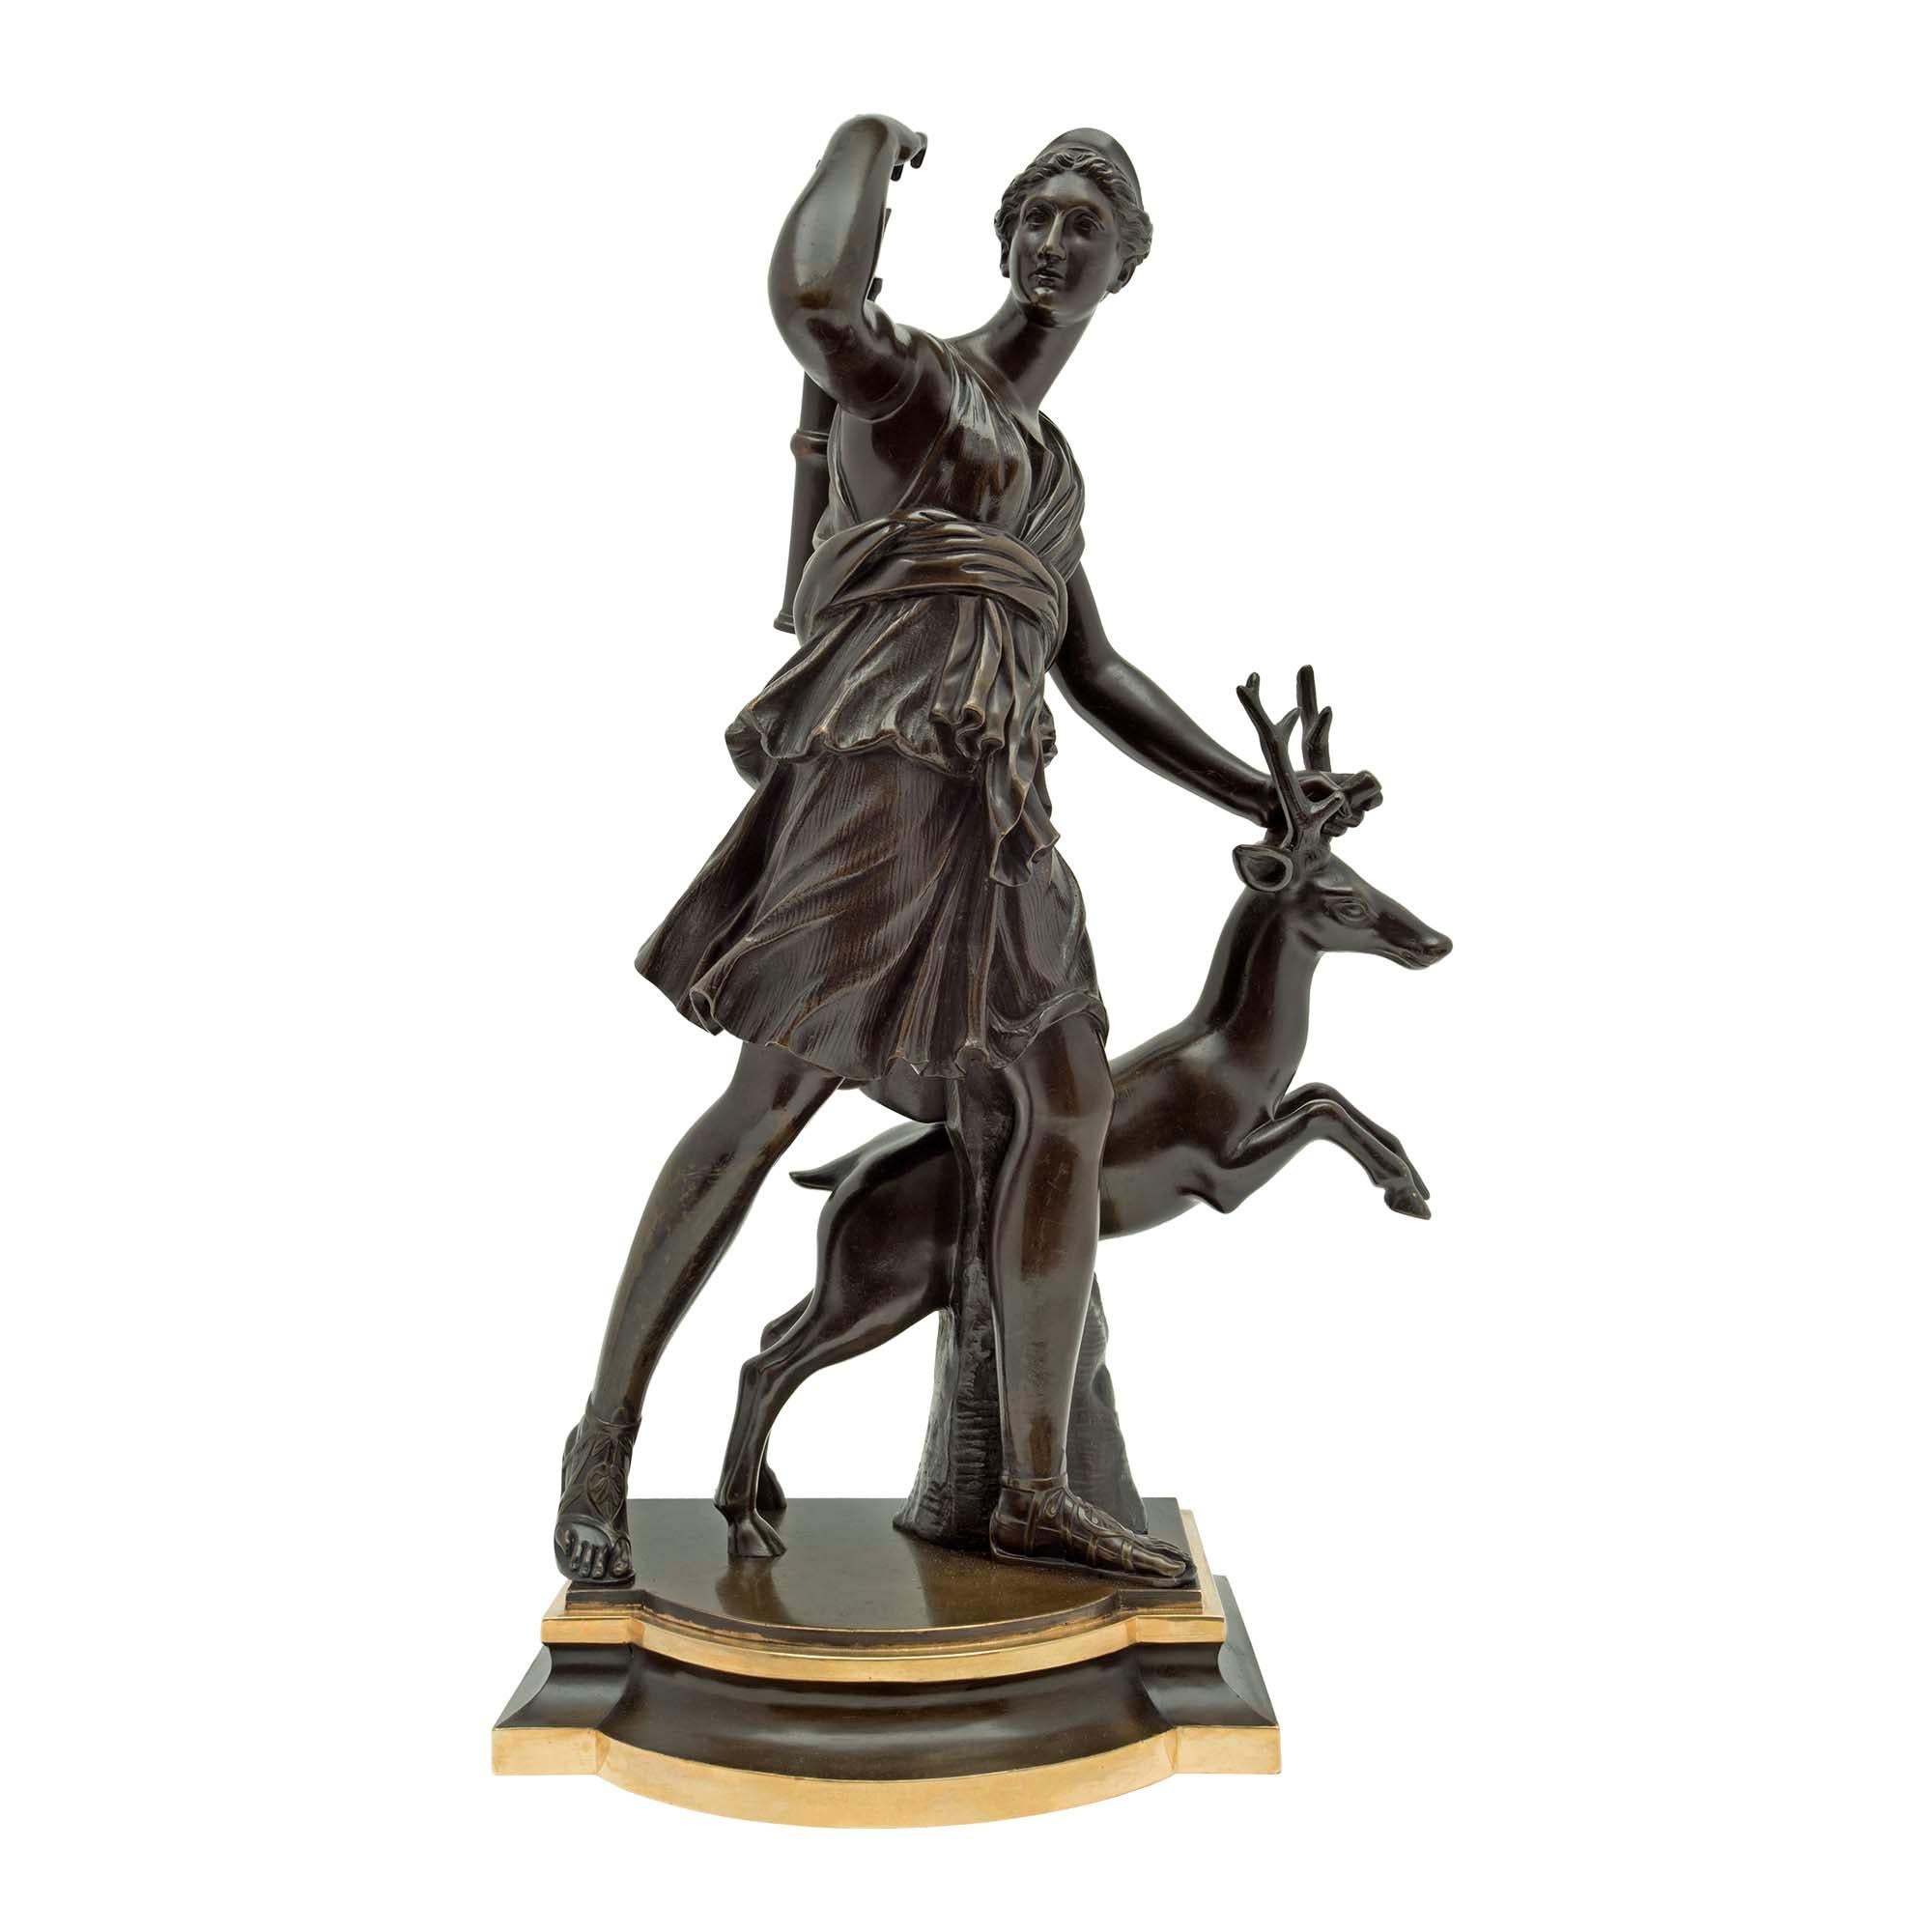 French 19th Century Patinated Bronze and Ormolu Statue of Diana the Huntress